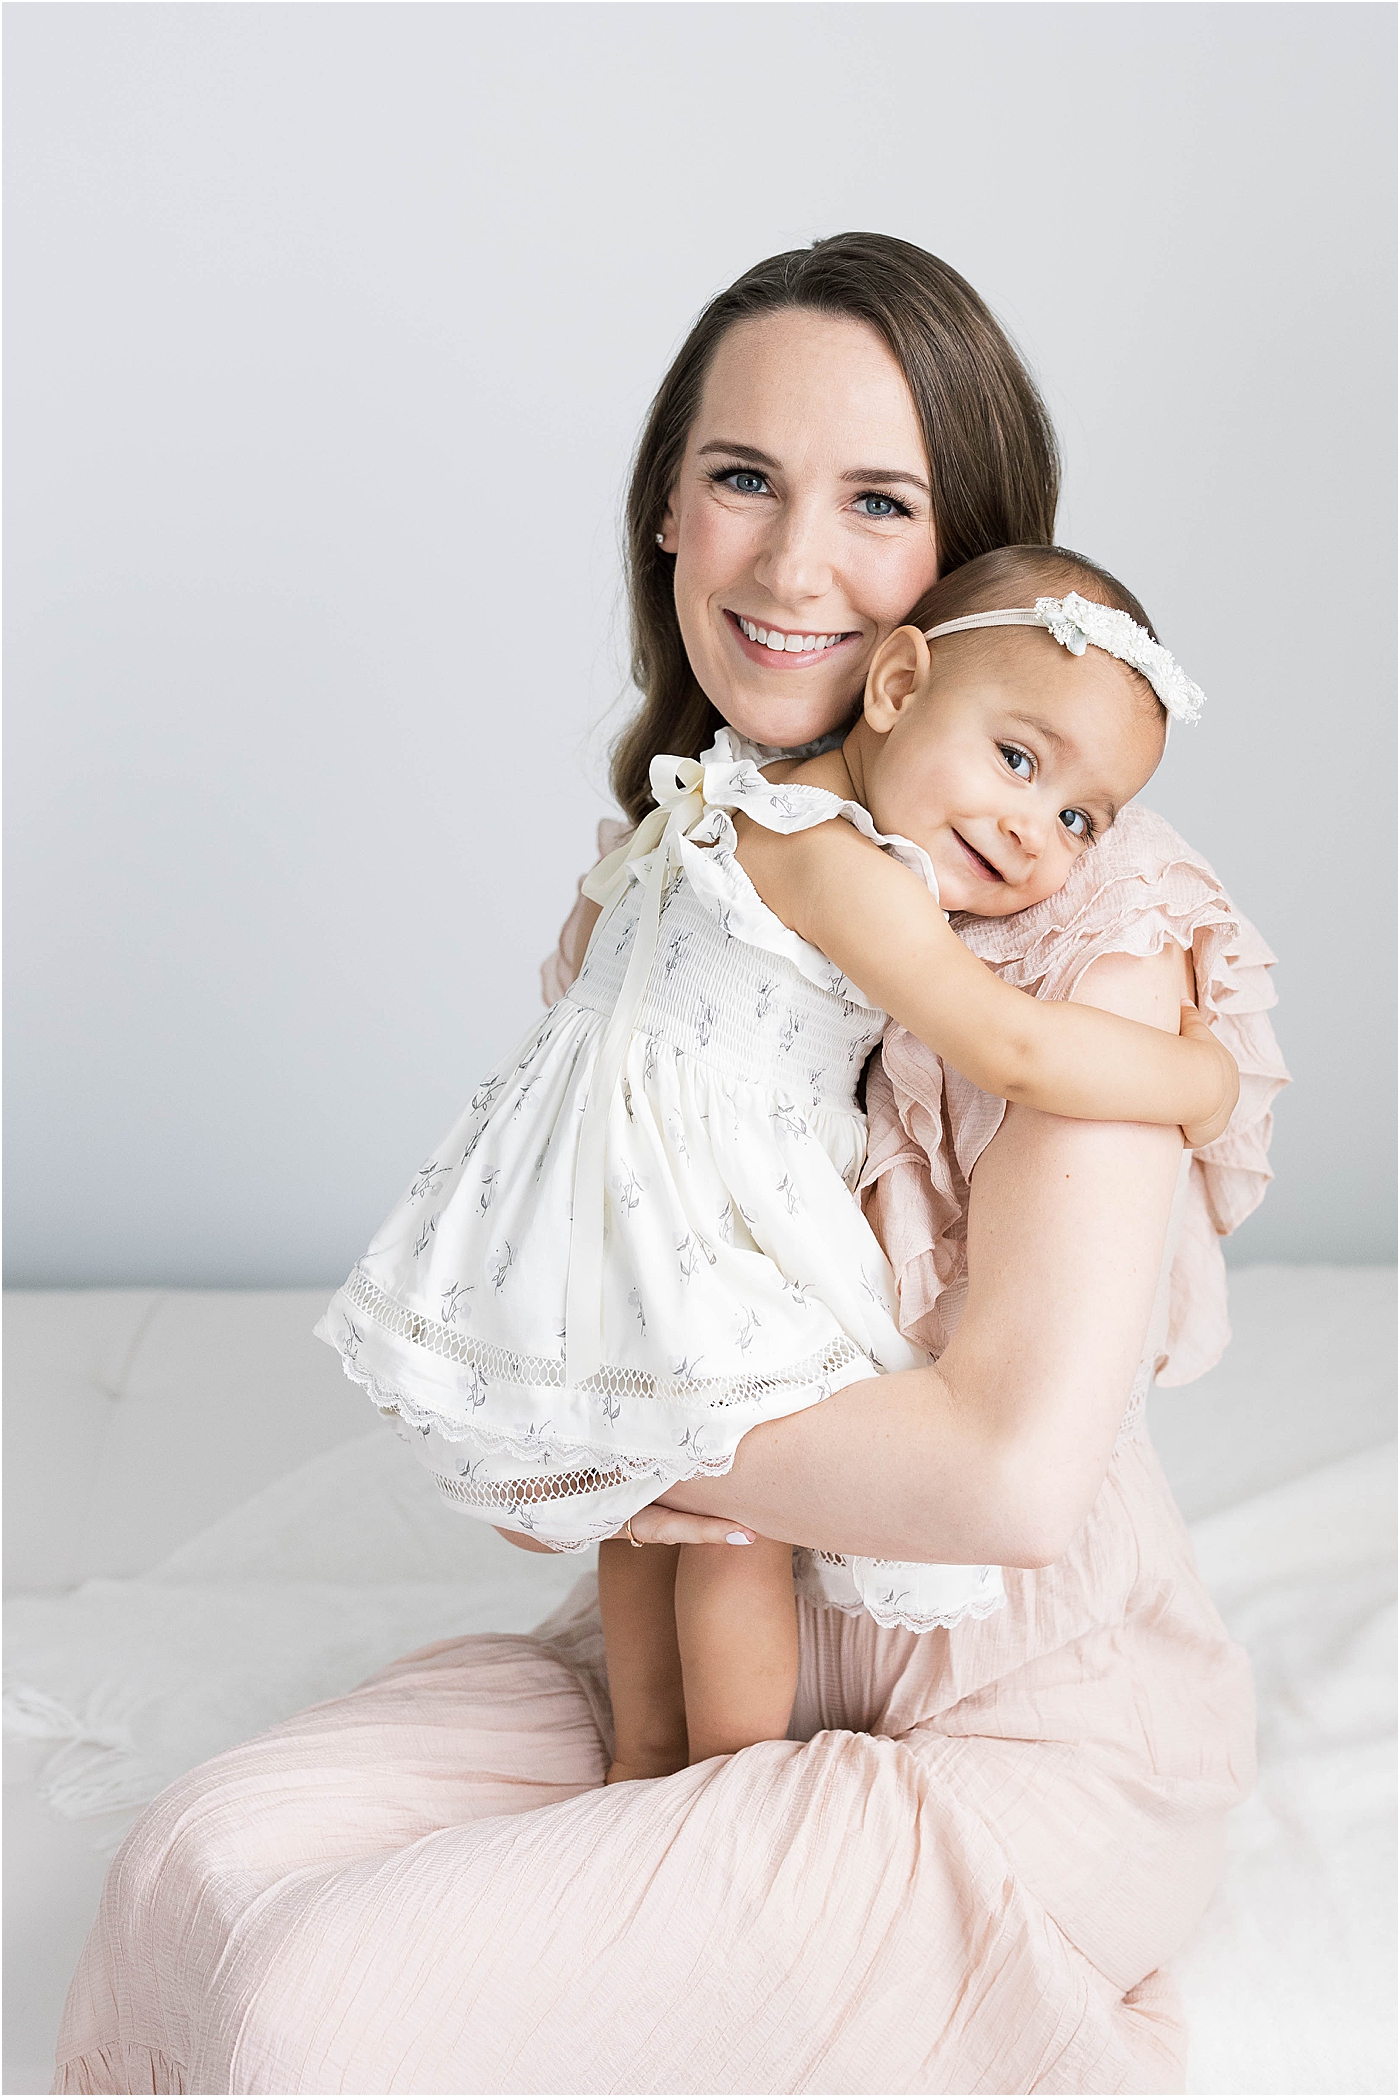 One year old hugging Mom during photoshoot with Lindsay Konopa Photography.